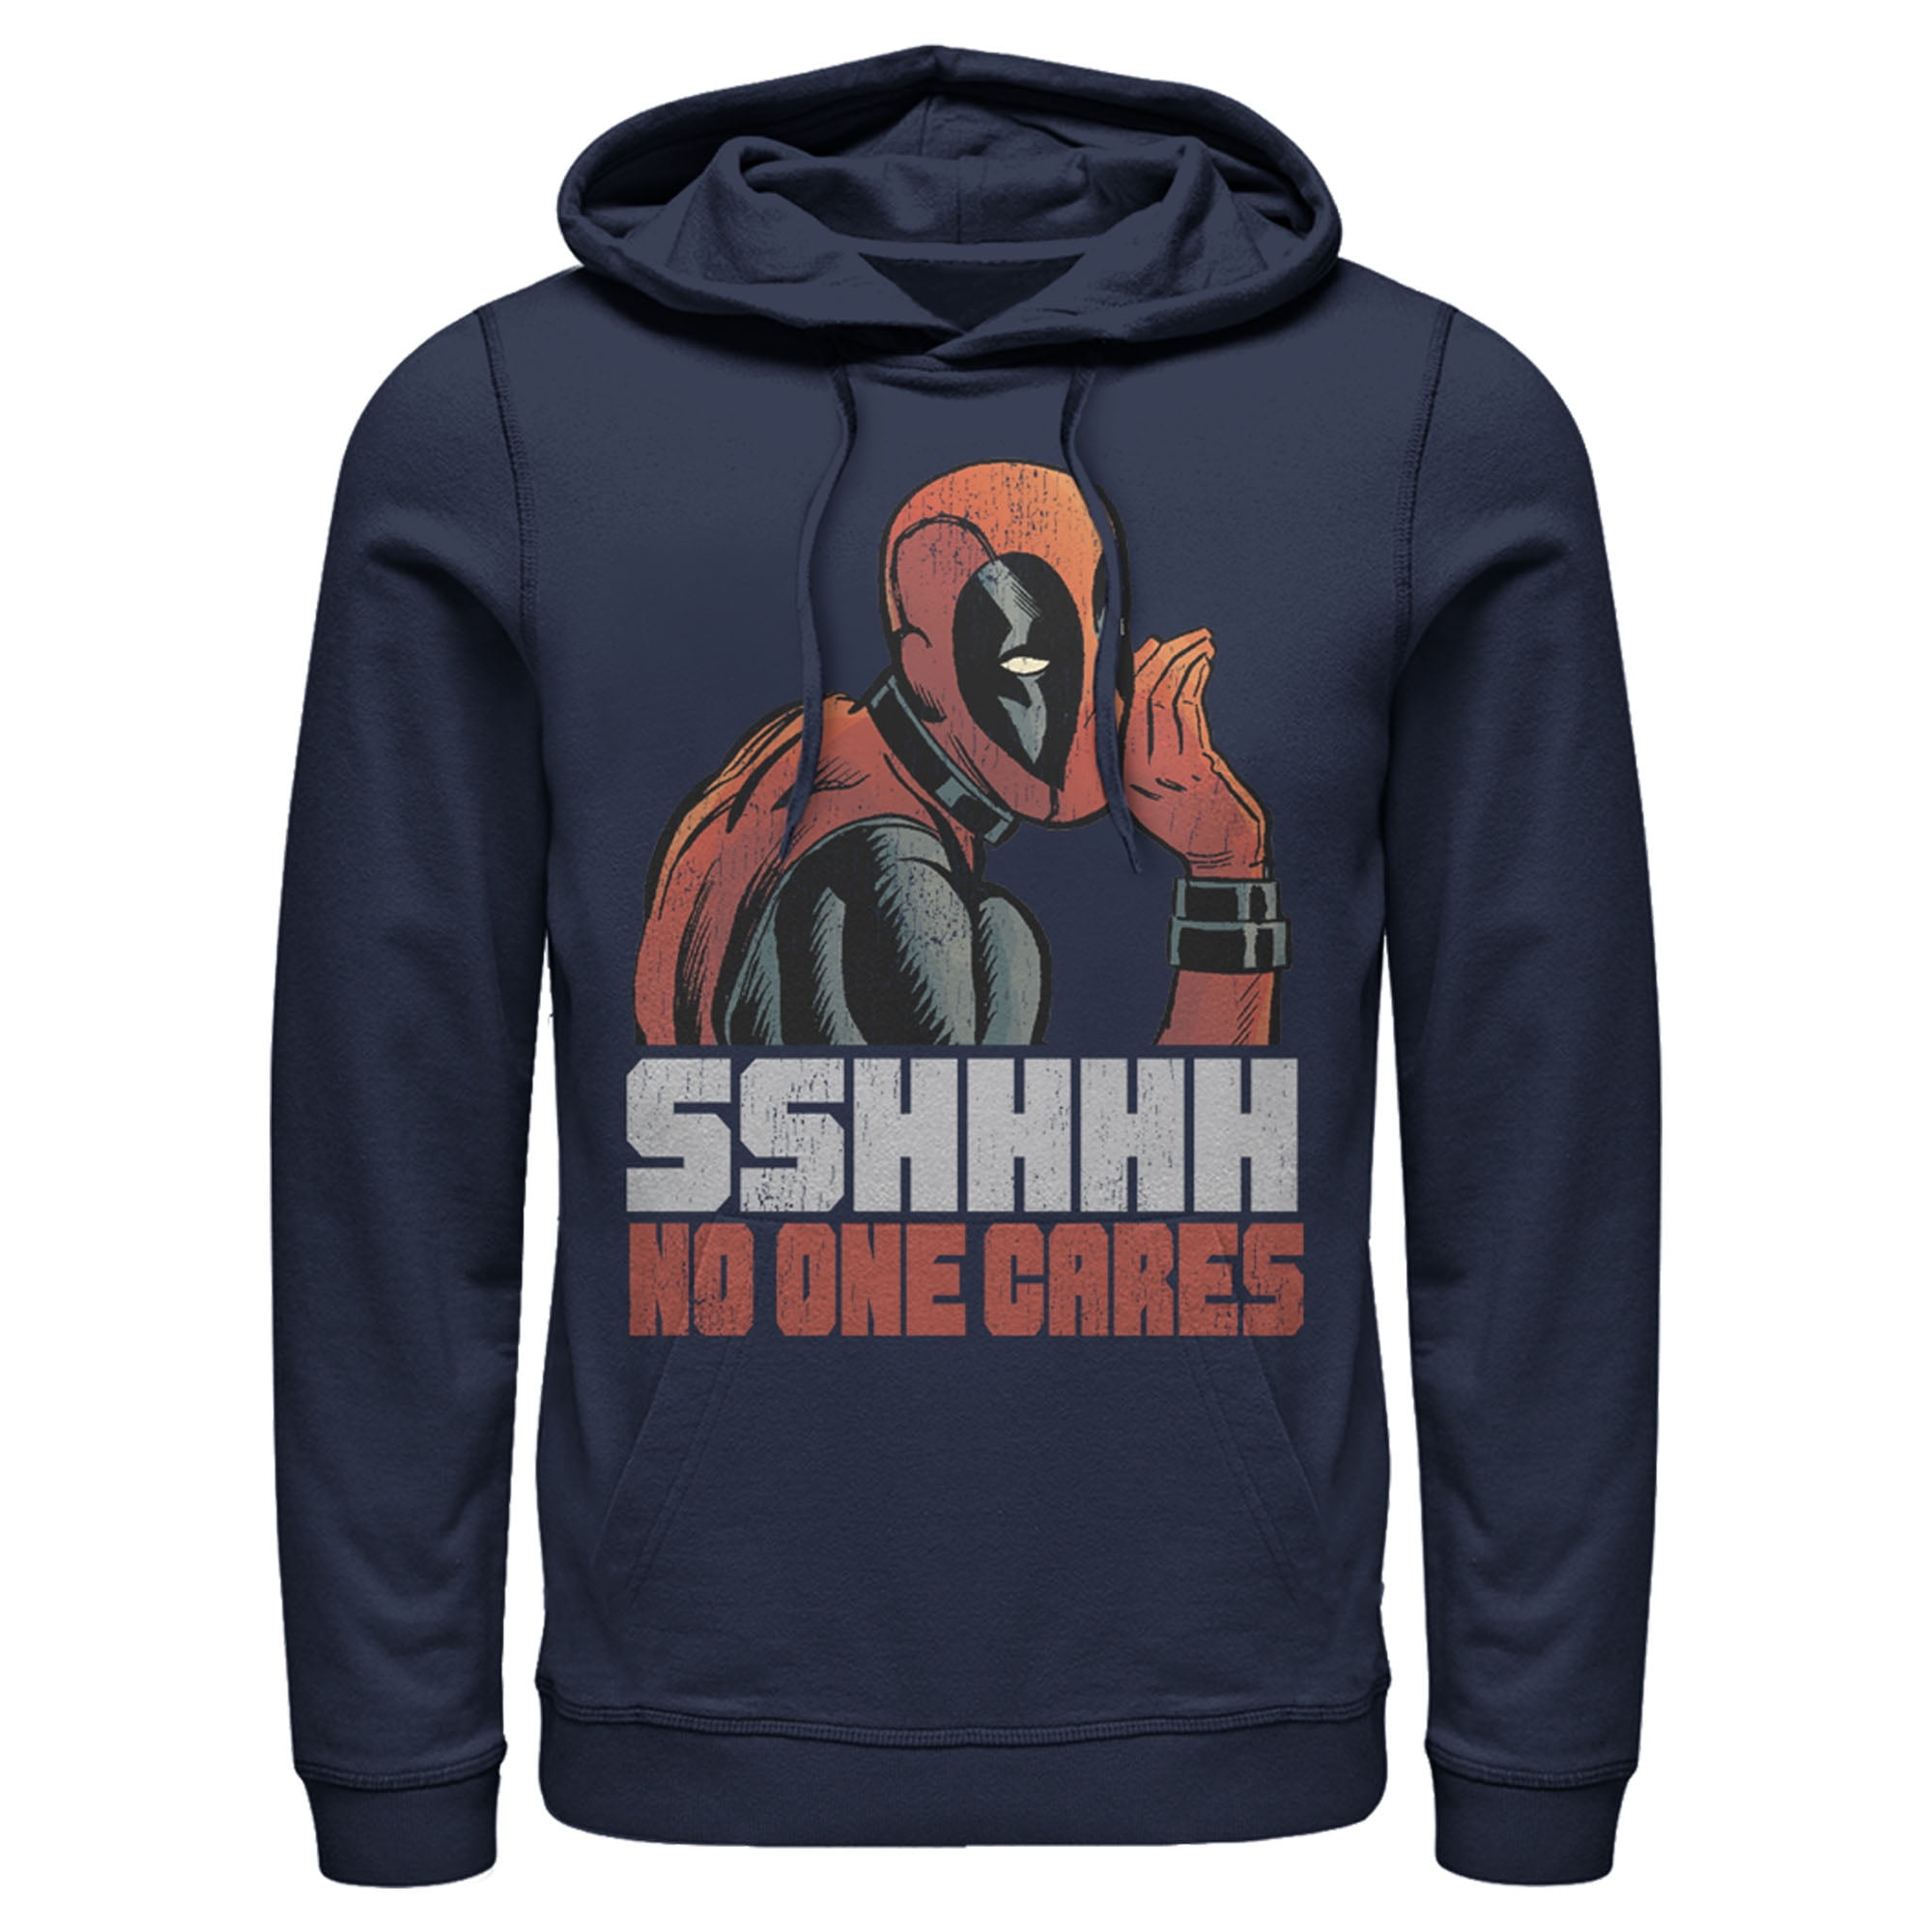 Men's Marvel Deadpool No One Cares Pull Over Hoodie Charcoal Heather Large